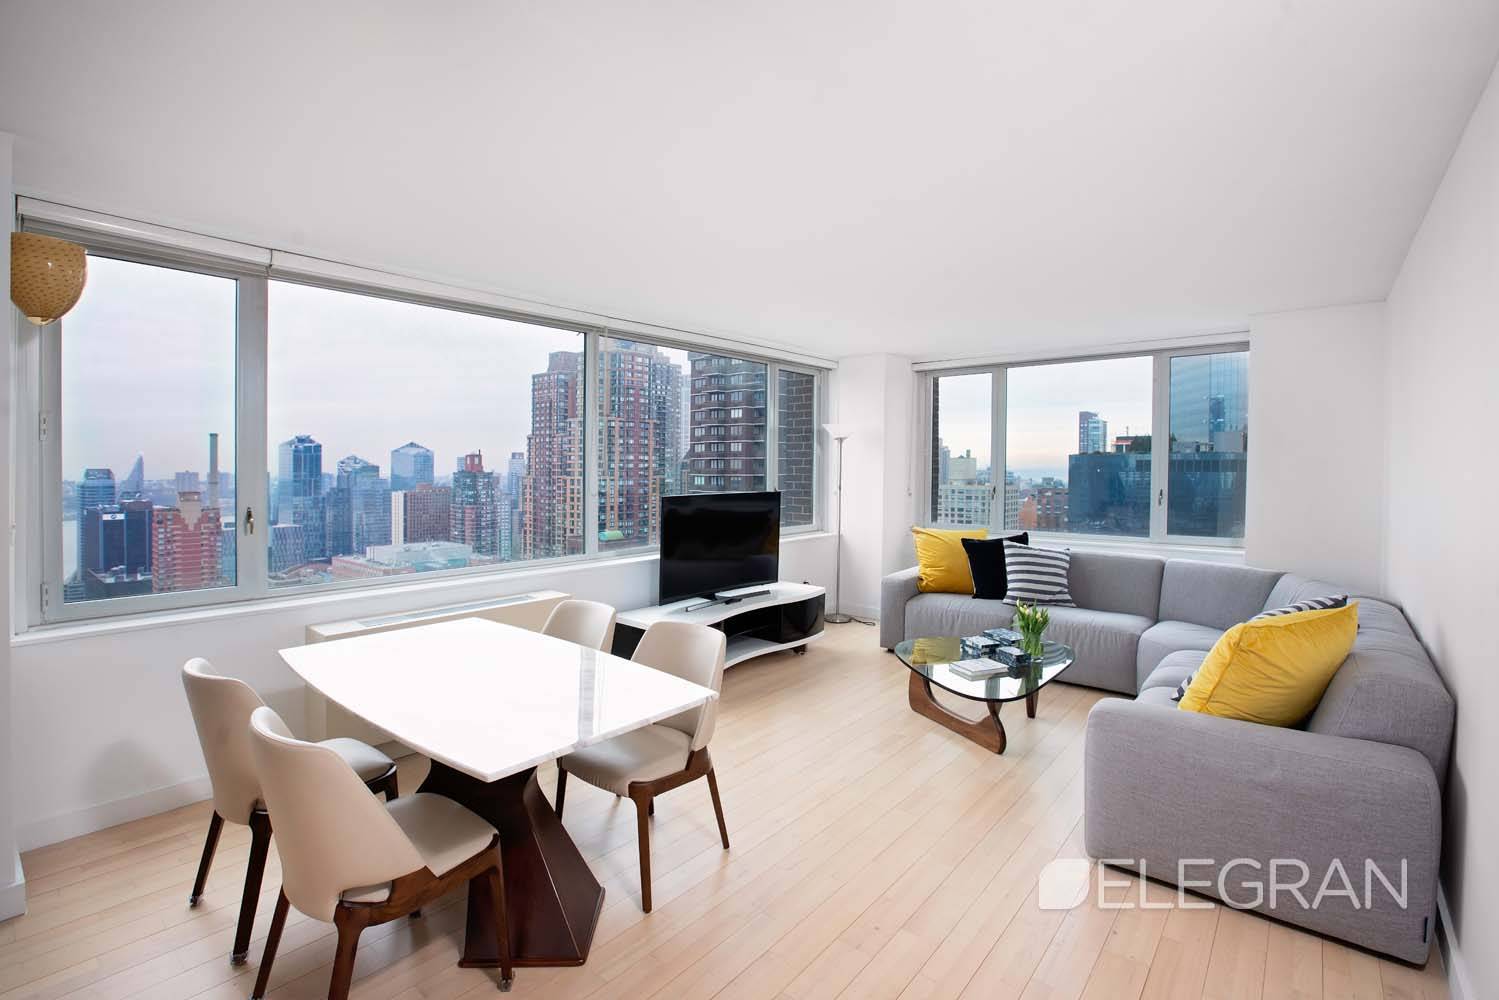 Beautiful, spacious 2 bedroom, 2 full bathroom home located next to some of the best dining and shopping in the city at Columbus Circle.